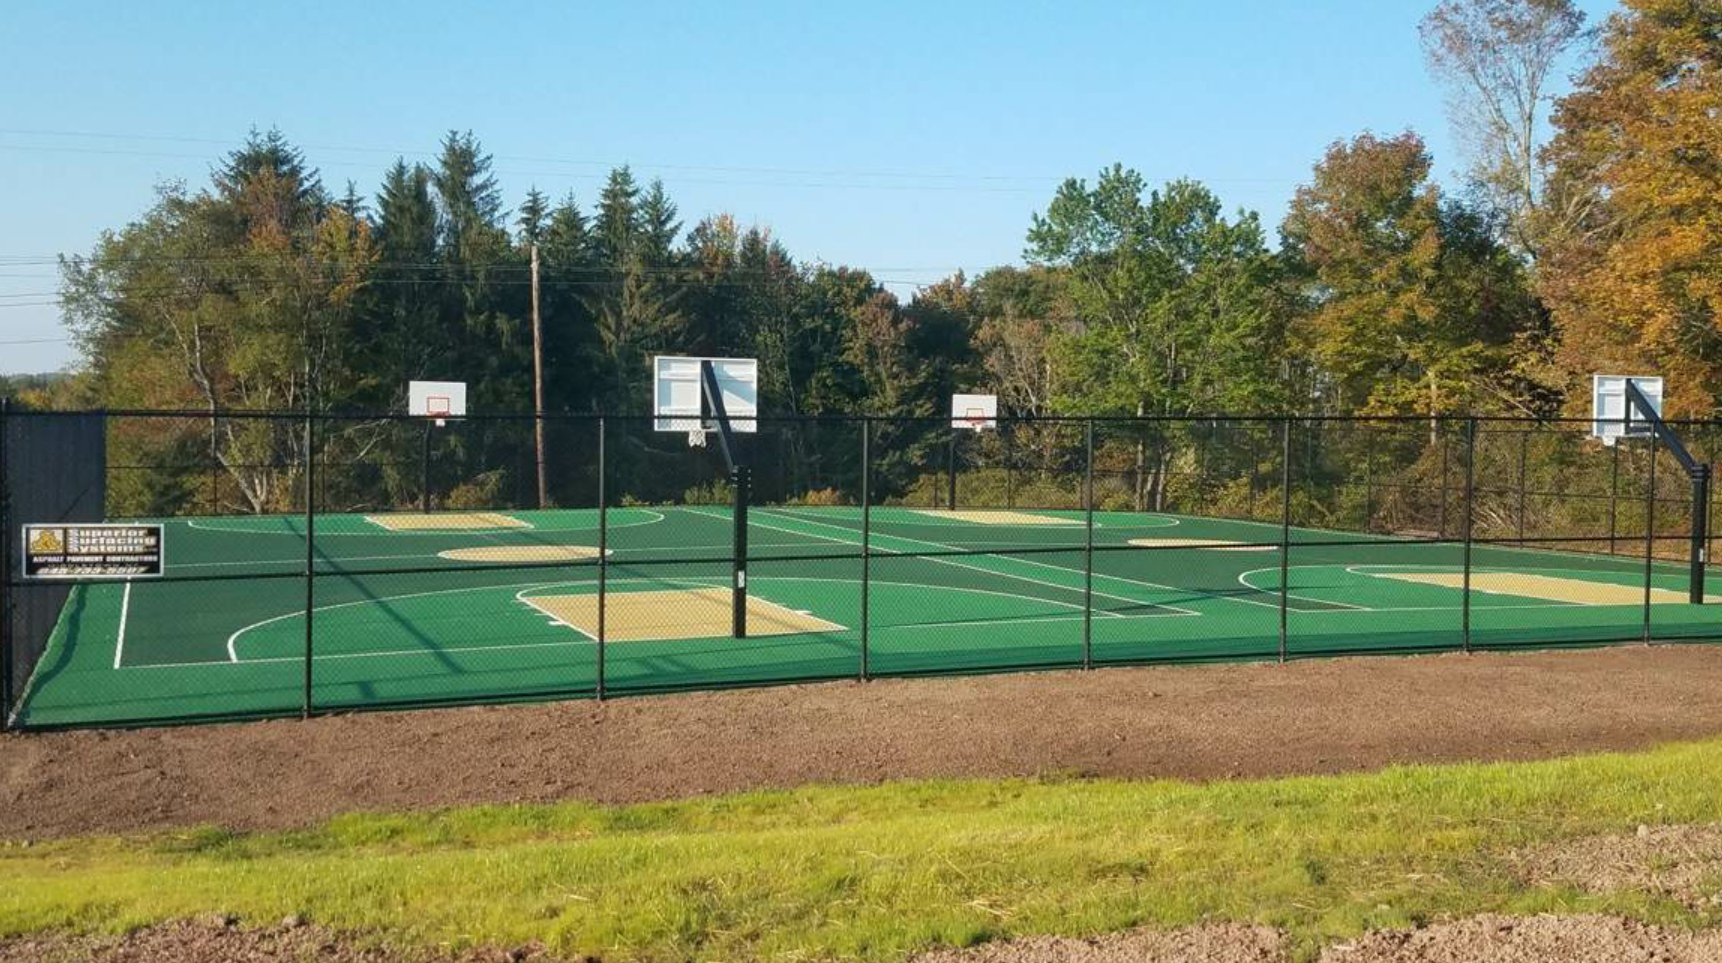 In 2015, the SUNY Sullivan Athletic Department received a $1 million private donation, which they used to turn the outdated tennis courts into basketball courts.